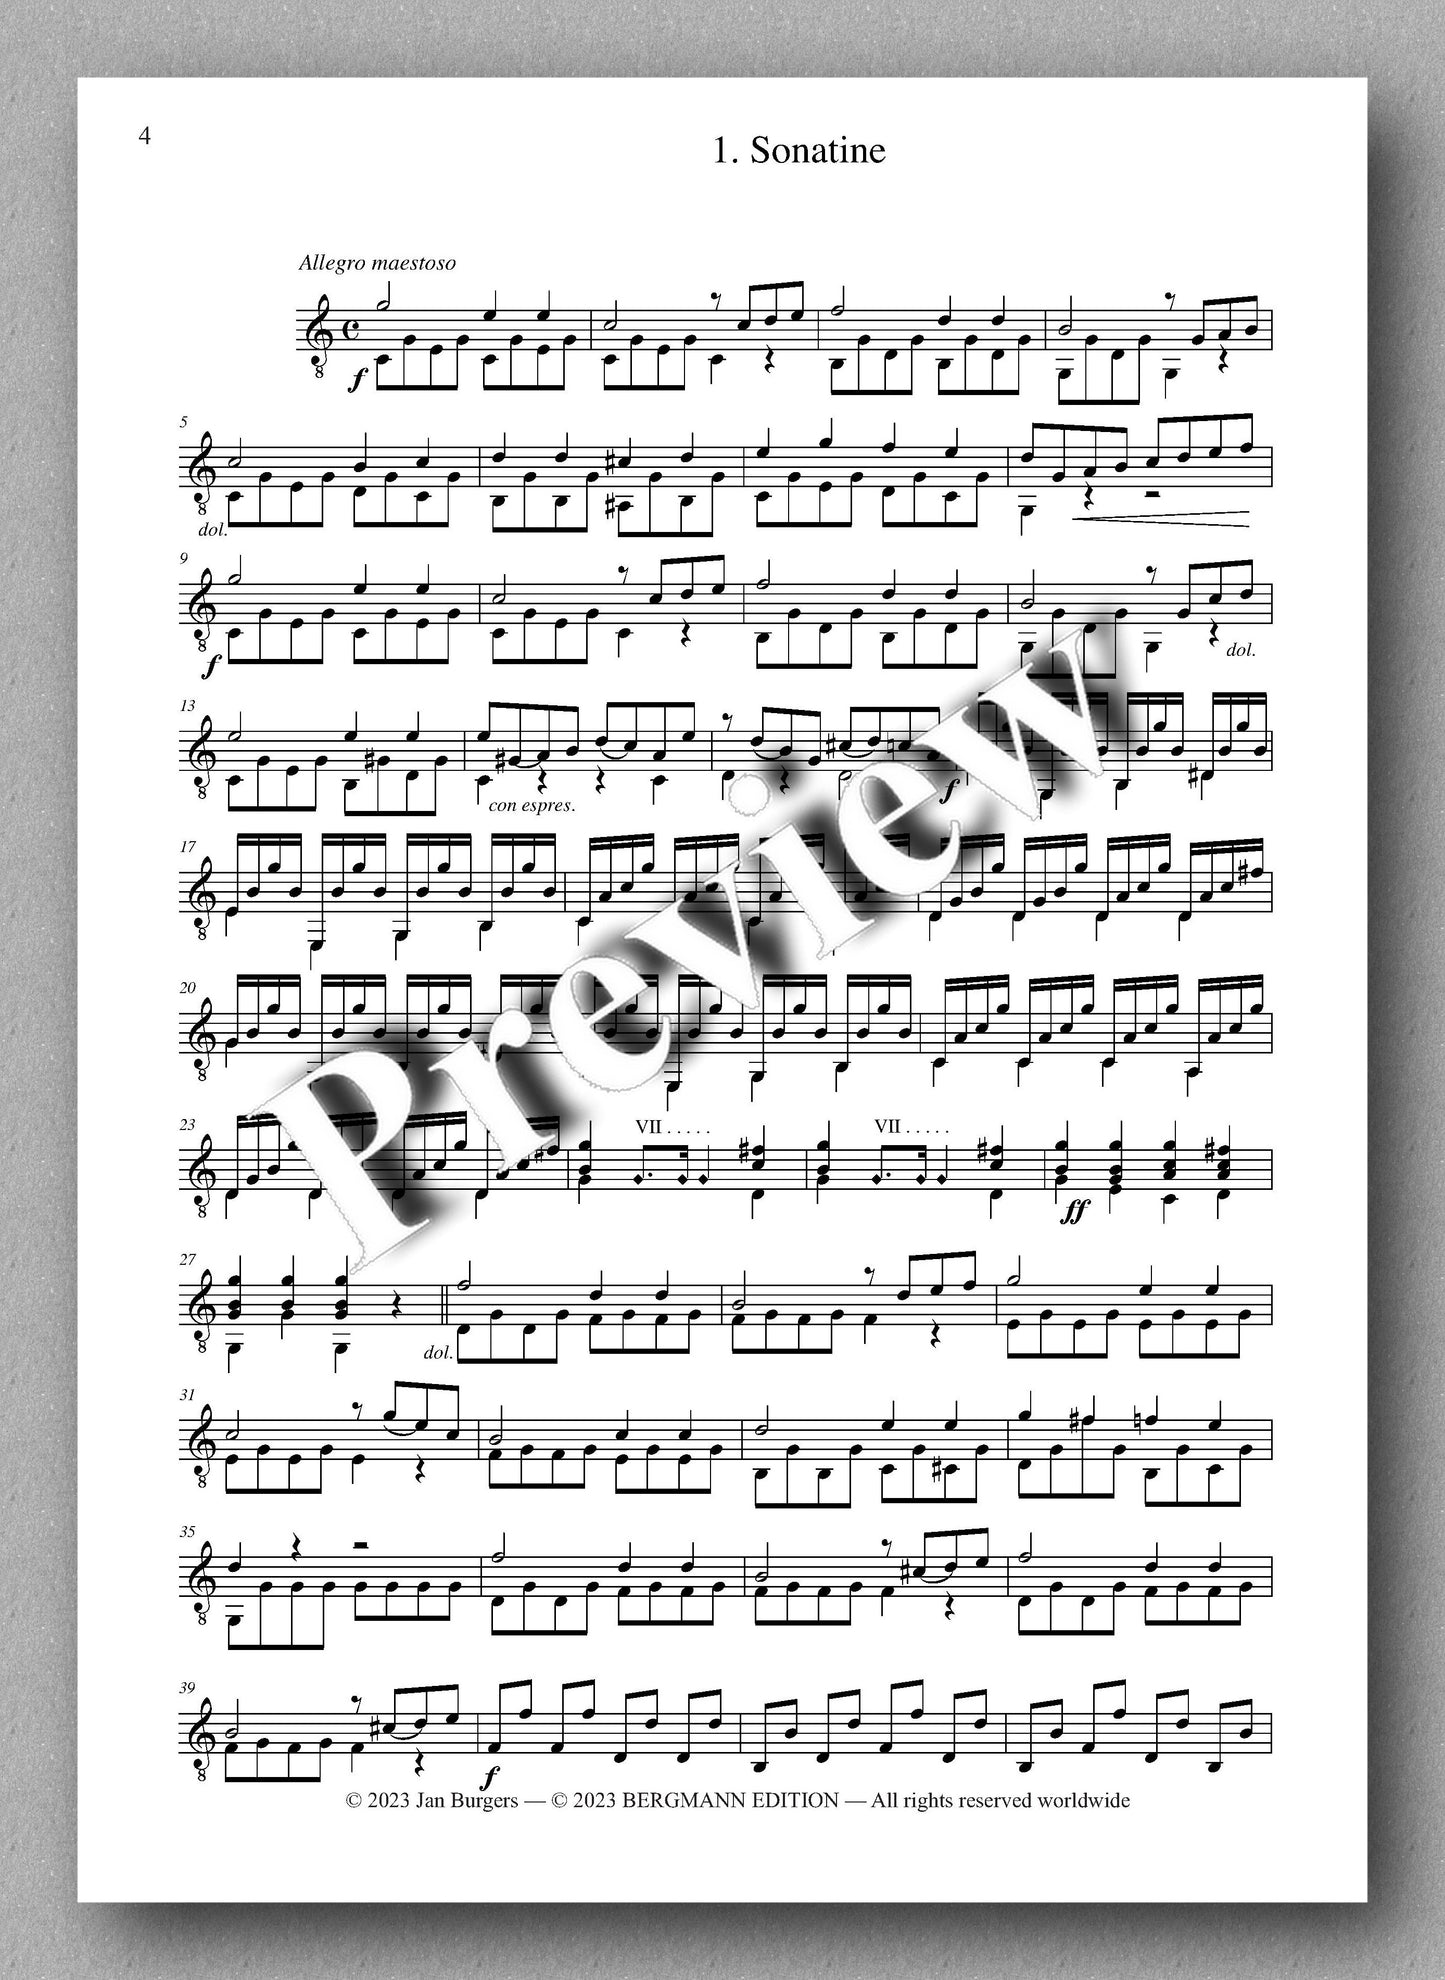 Molino, Collected Works for Guitar Solo, Vol. 16 - preview of the music score 1